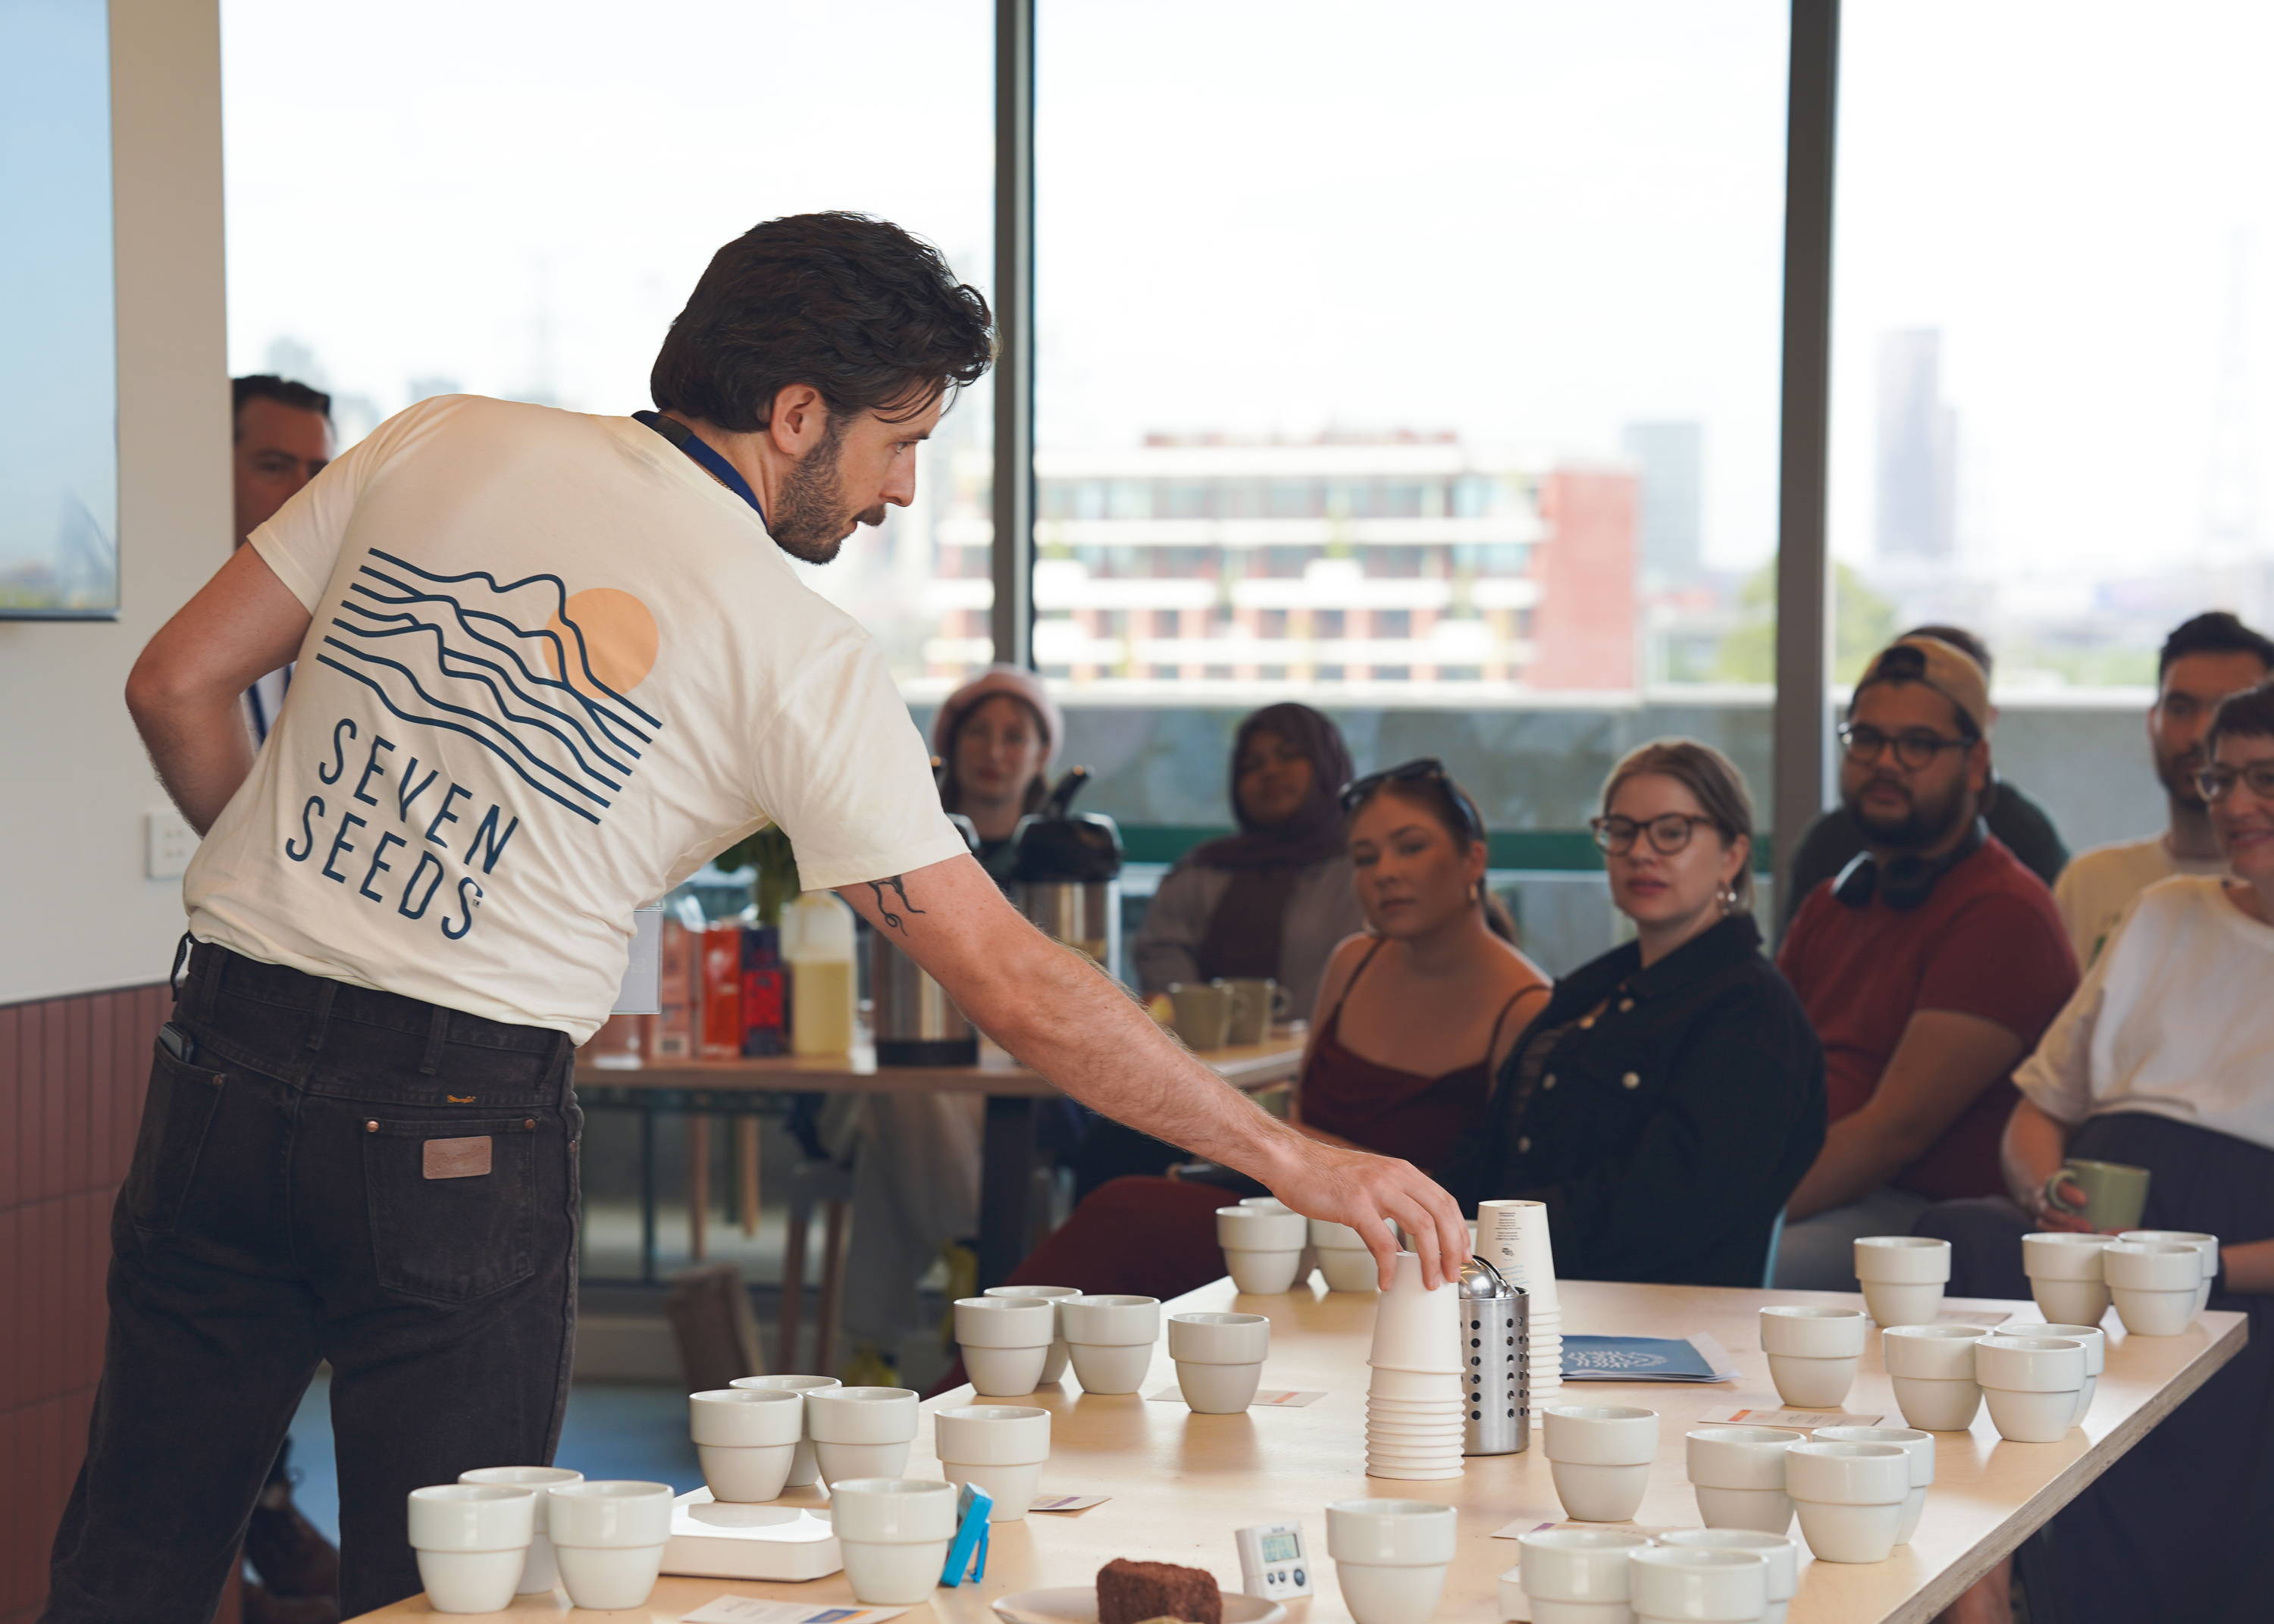 Erick, Seven Seeds Sales Manager explains the process if Cupping.